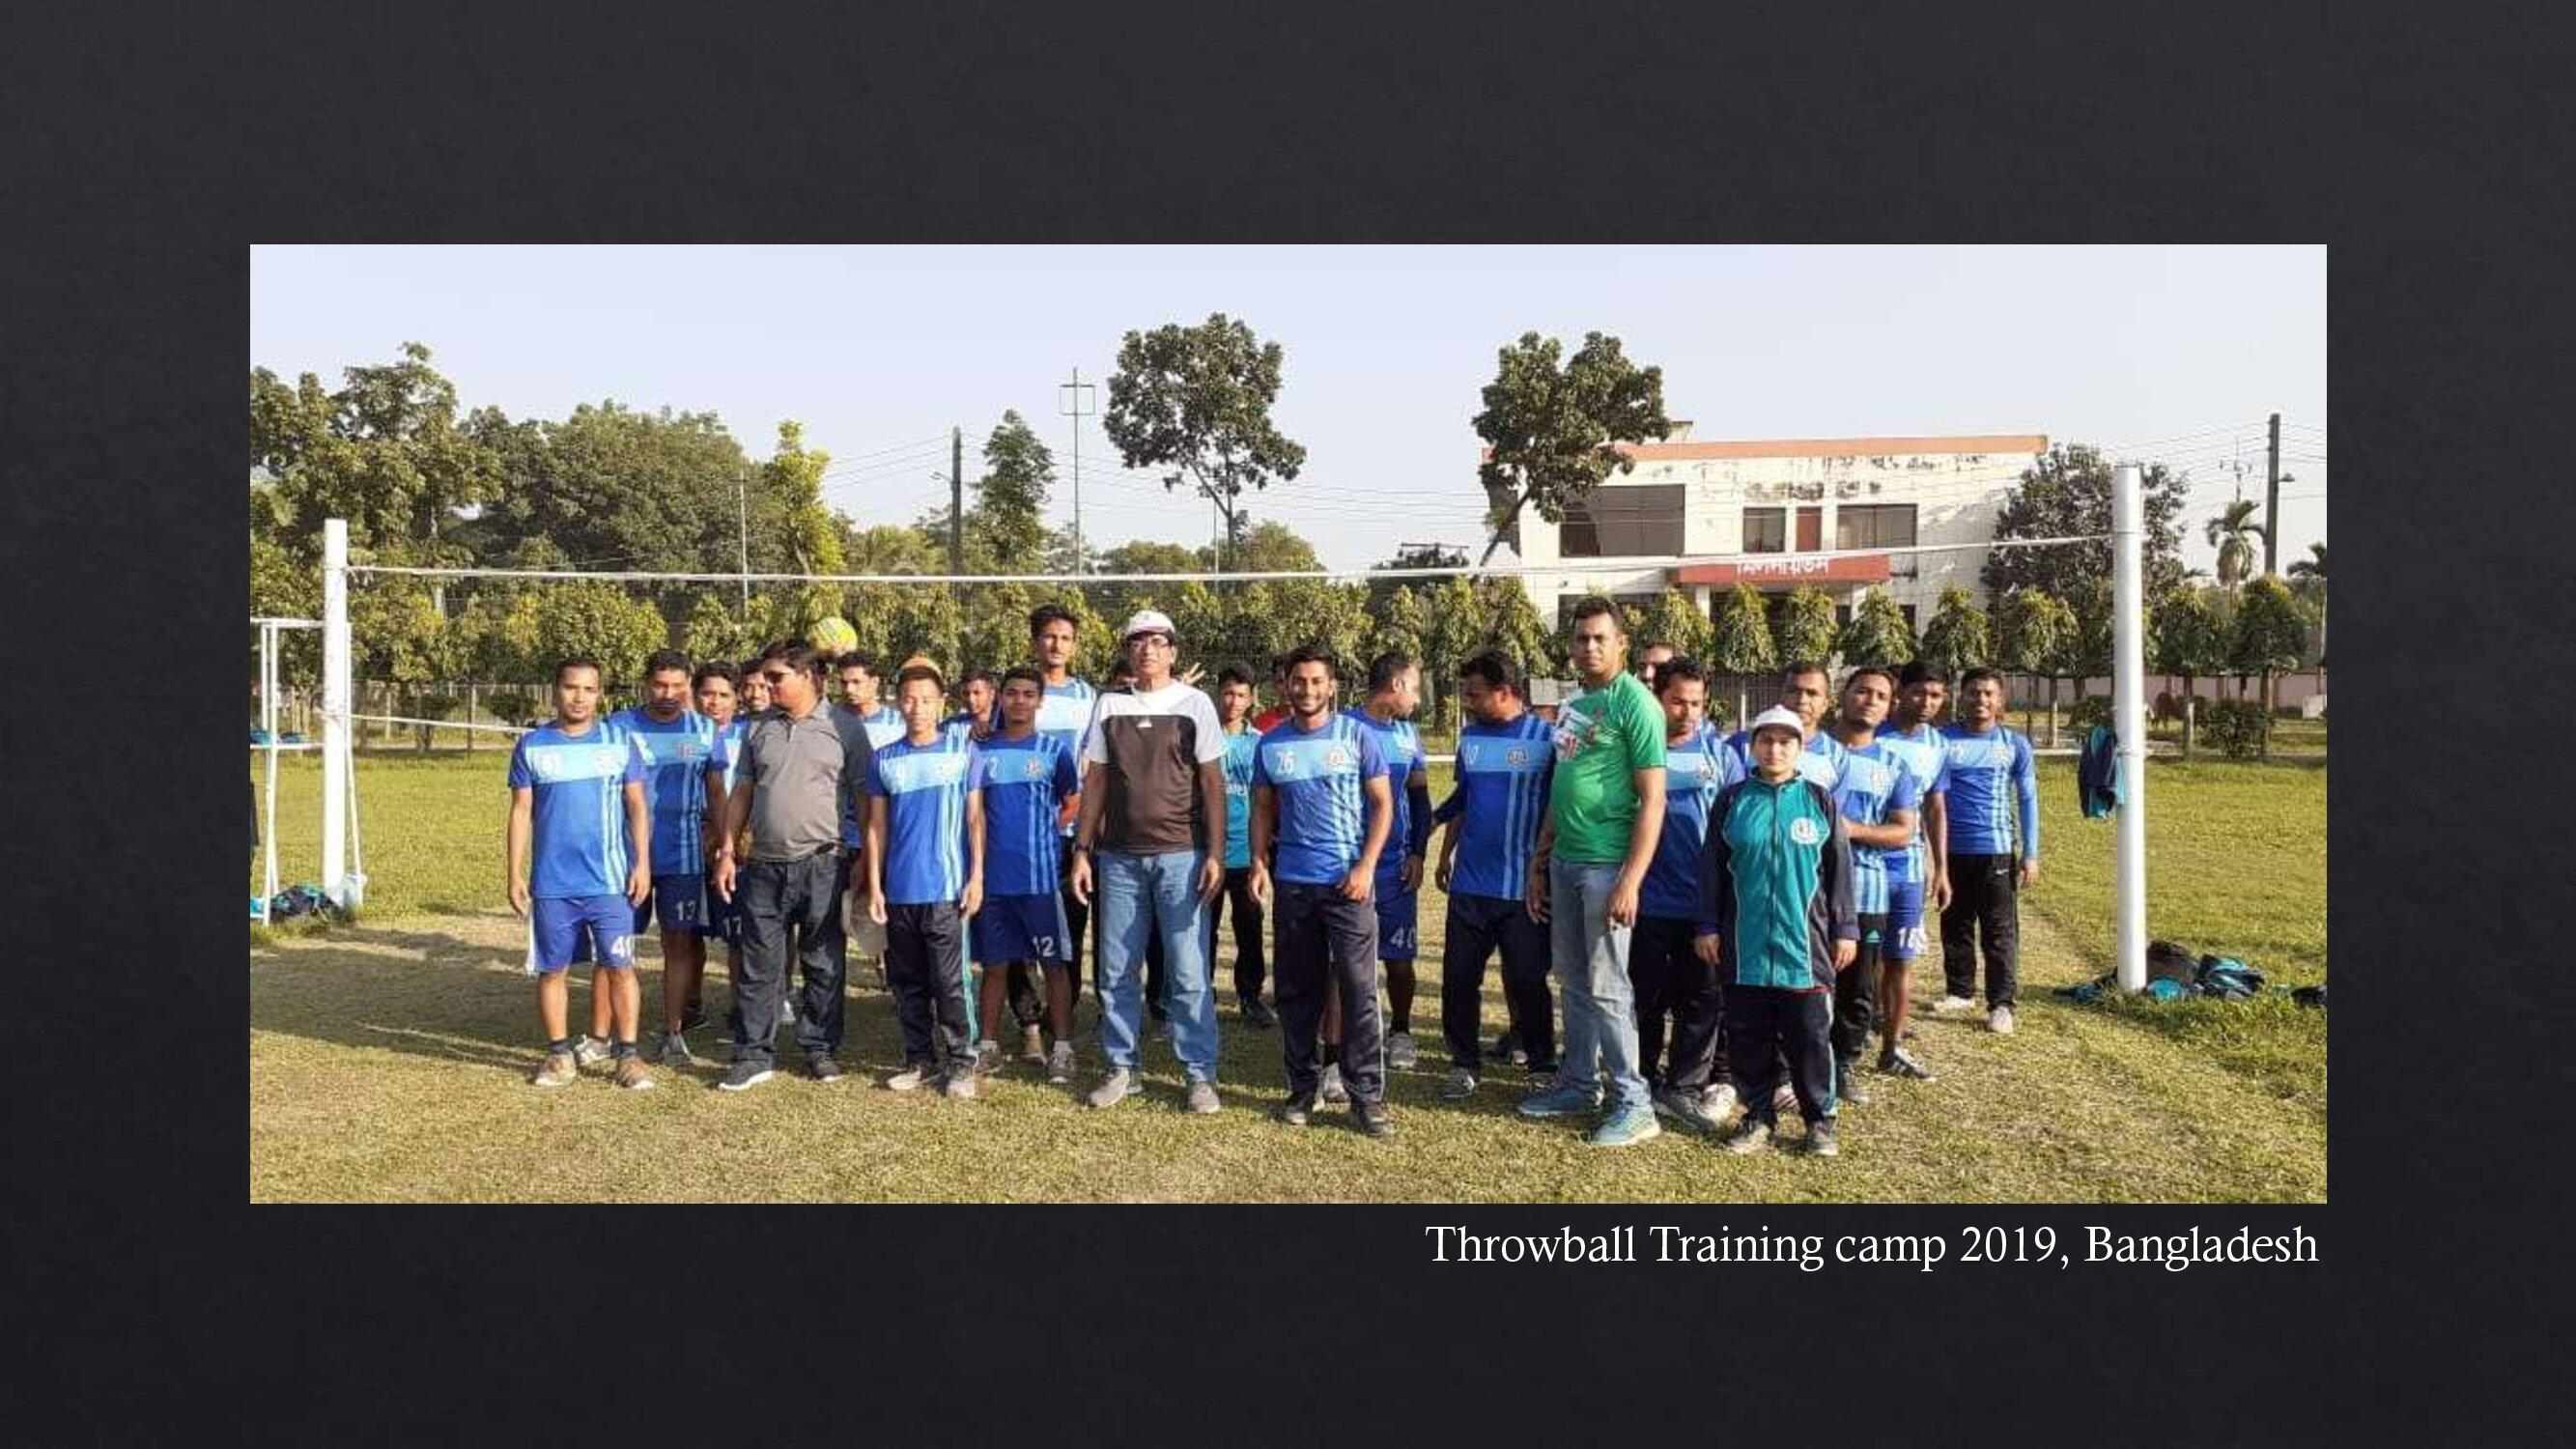 ThrowBall Federation Of India